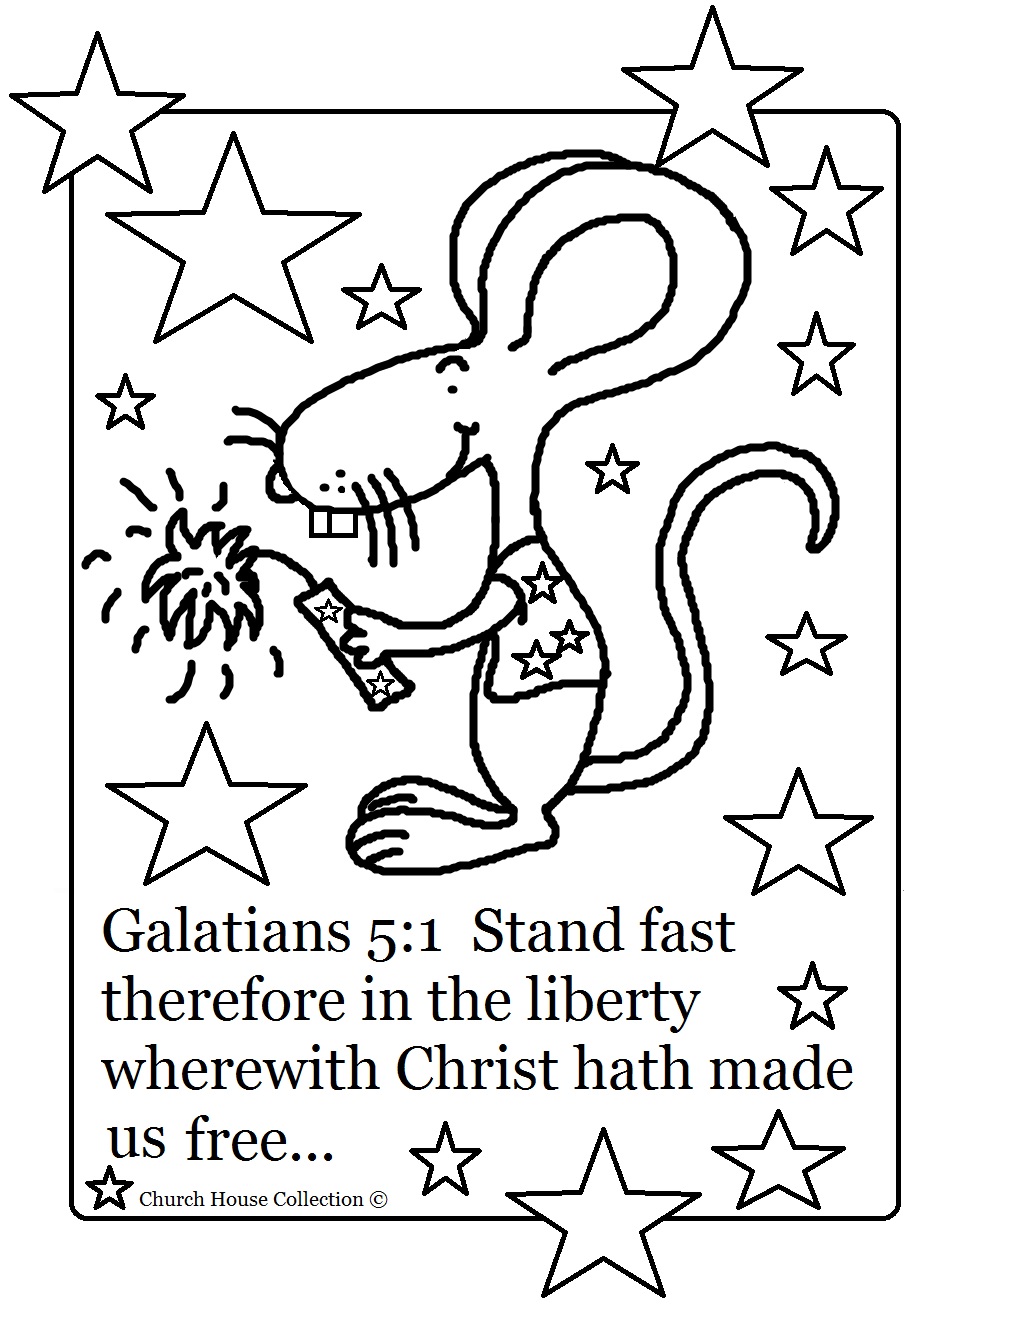 Church House Collection Blog: Fourth of July Coloring Pages For Sunday